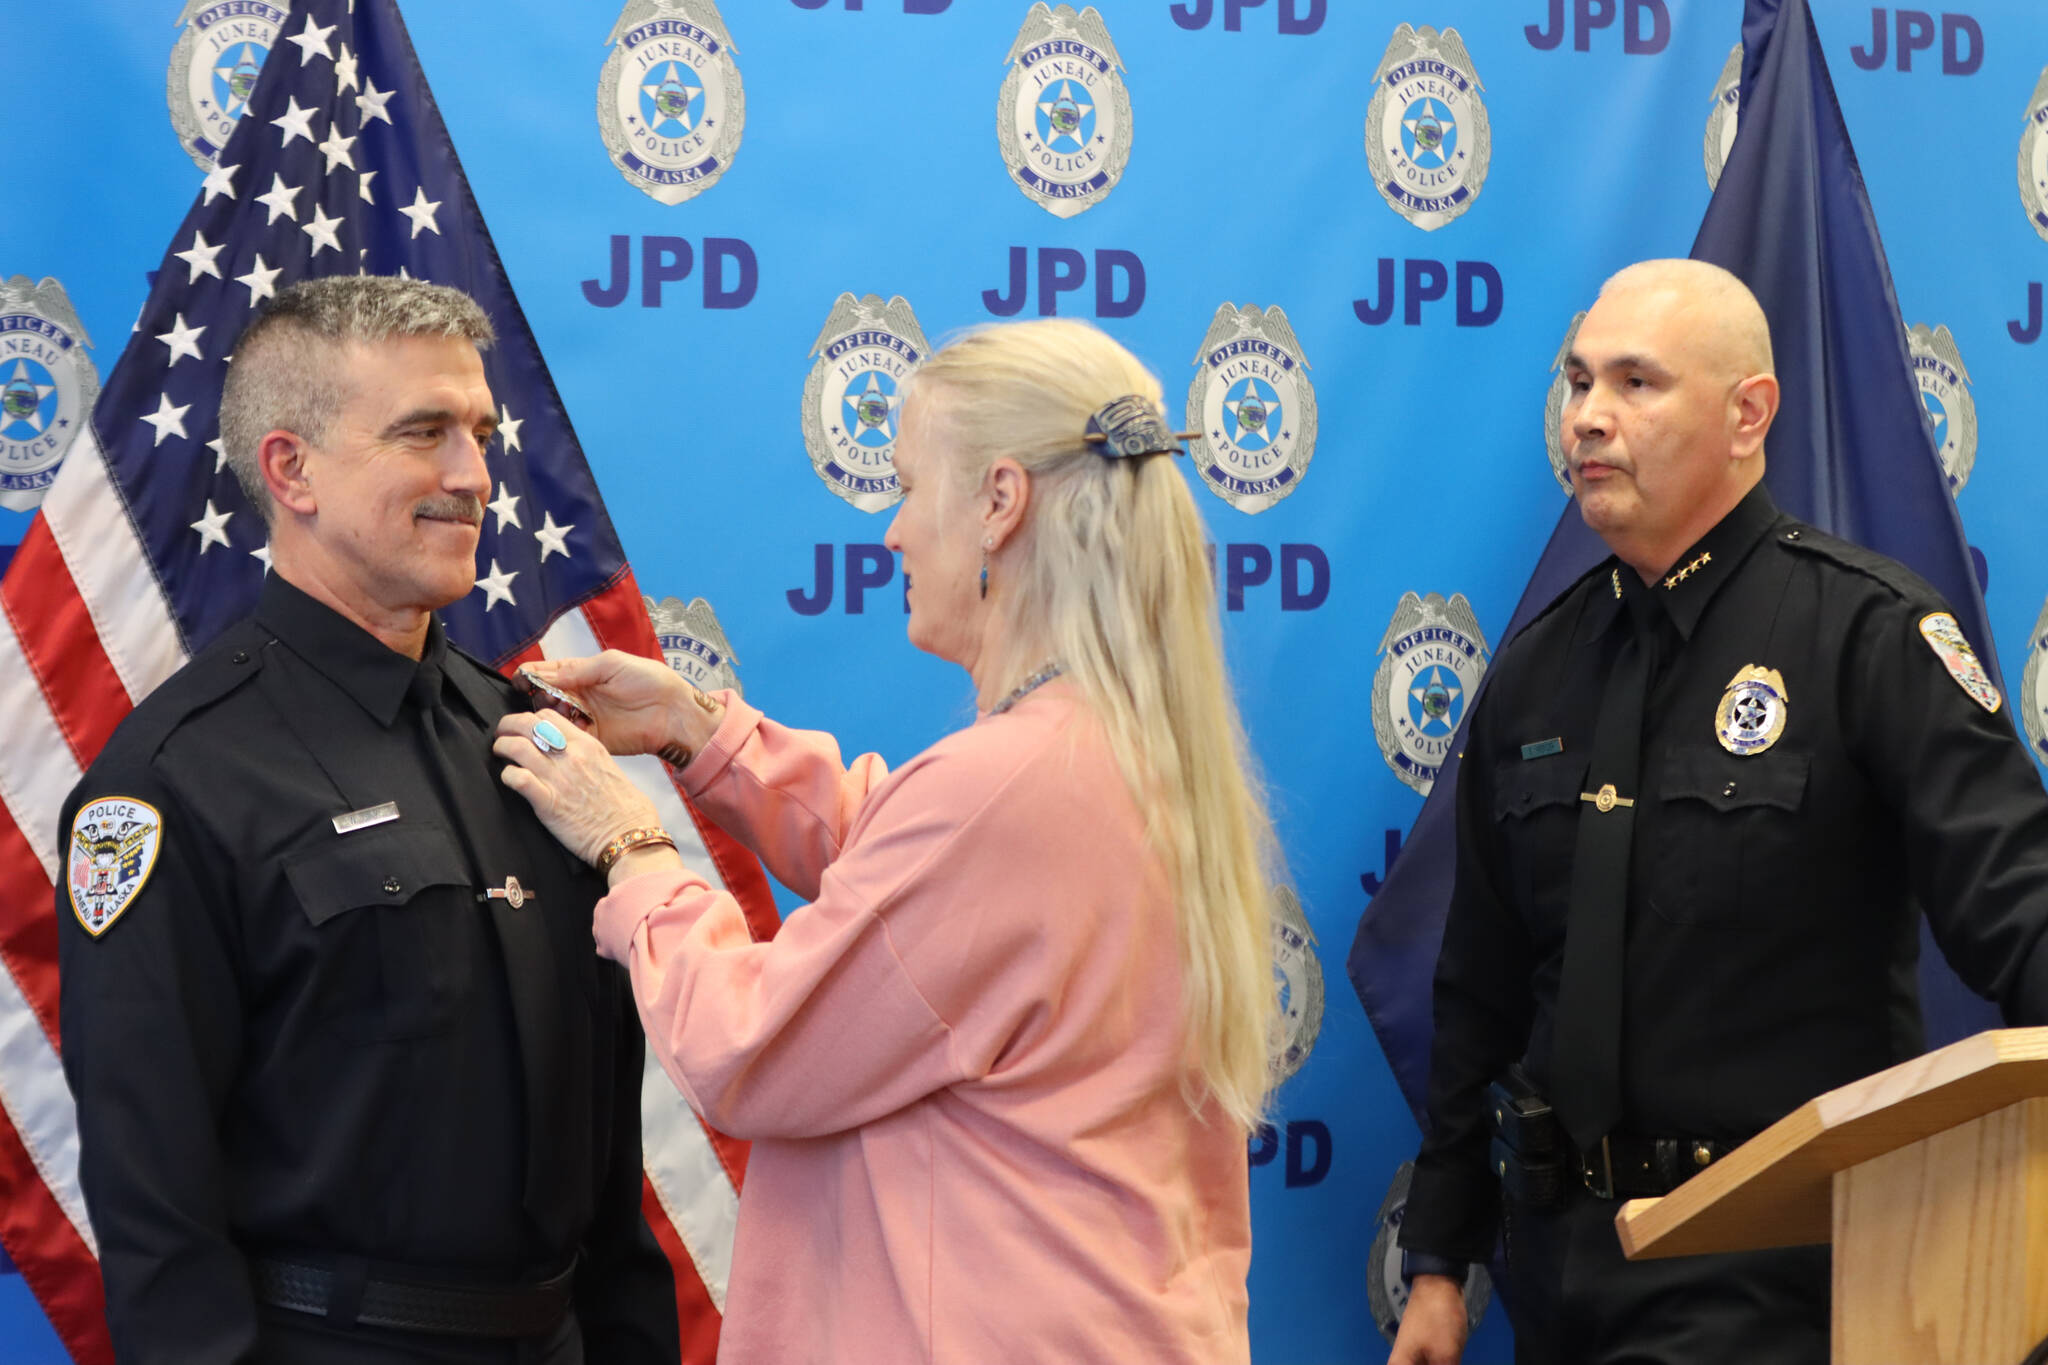 Officer William Hicks stands as his wife Corey Hicks pins a new officer’s badge to his uniform during a swearing in ceremony for Hicks on Thursday. (Jonson Kuhn / Juneau Empire)